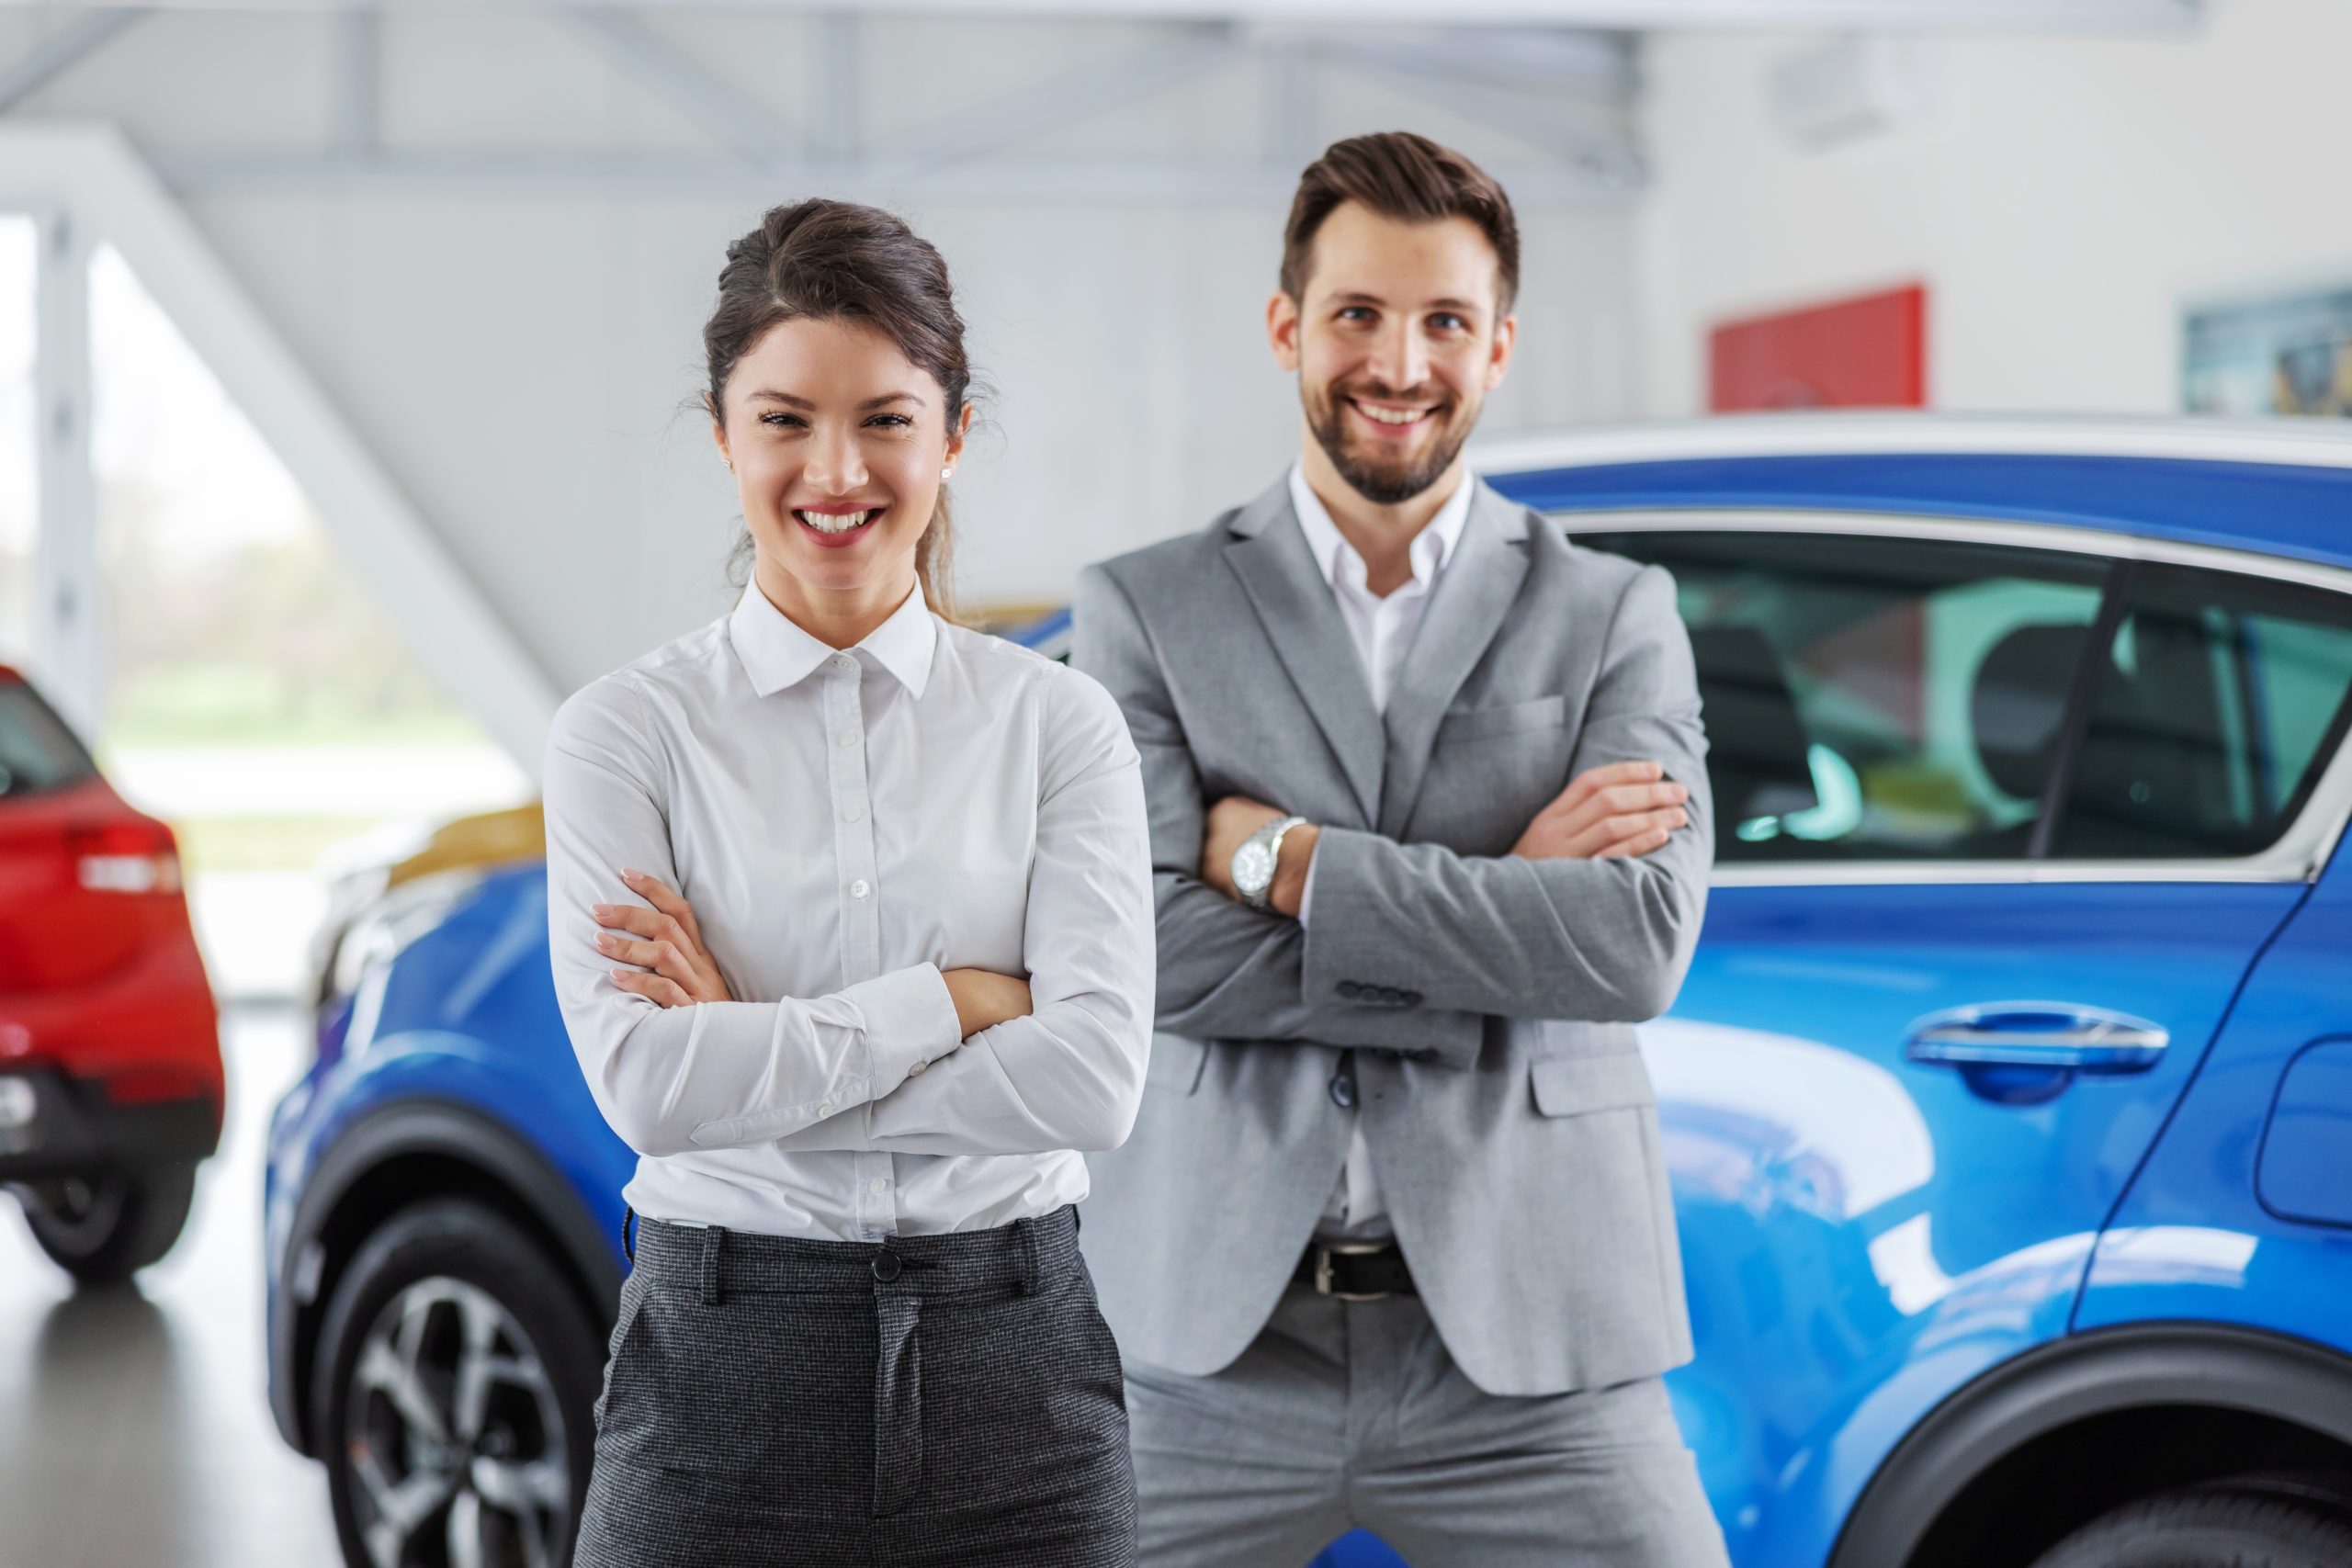 The Autopeople Report | November 2022 Updates - Autopeople Automotive Recruiting